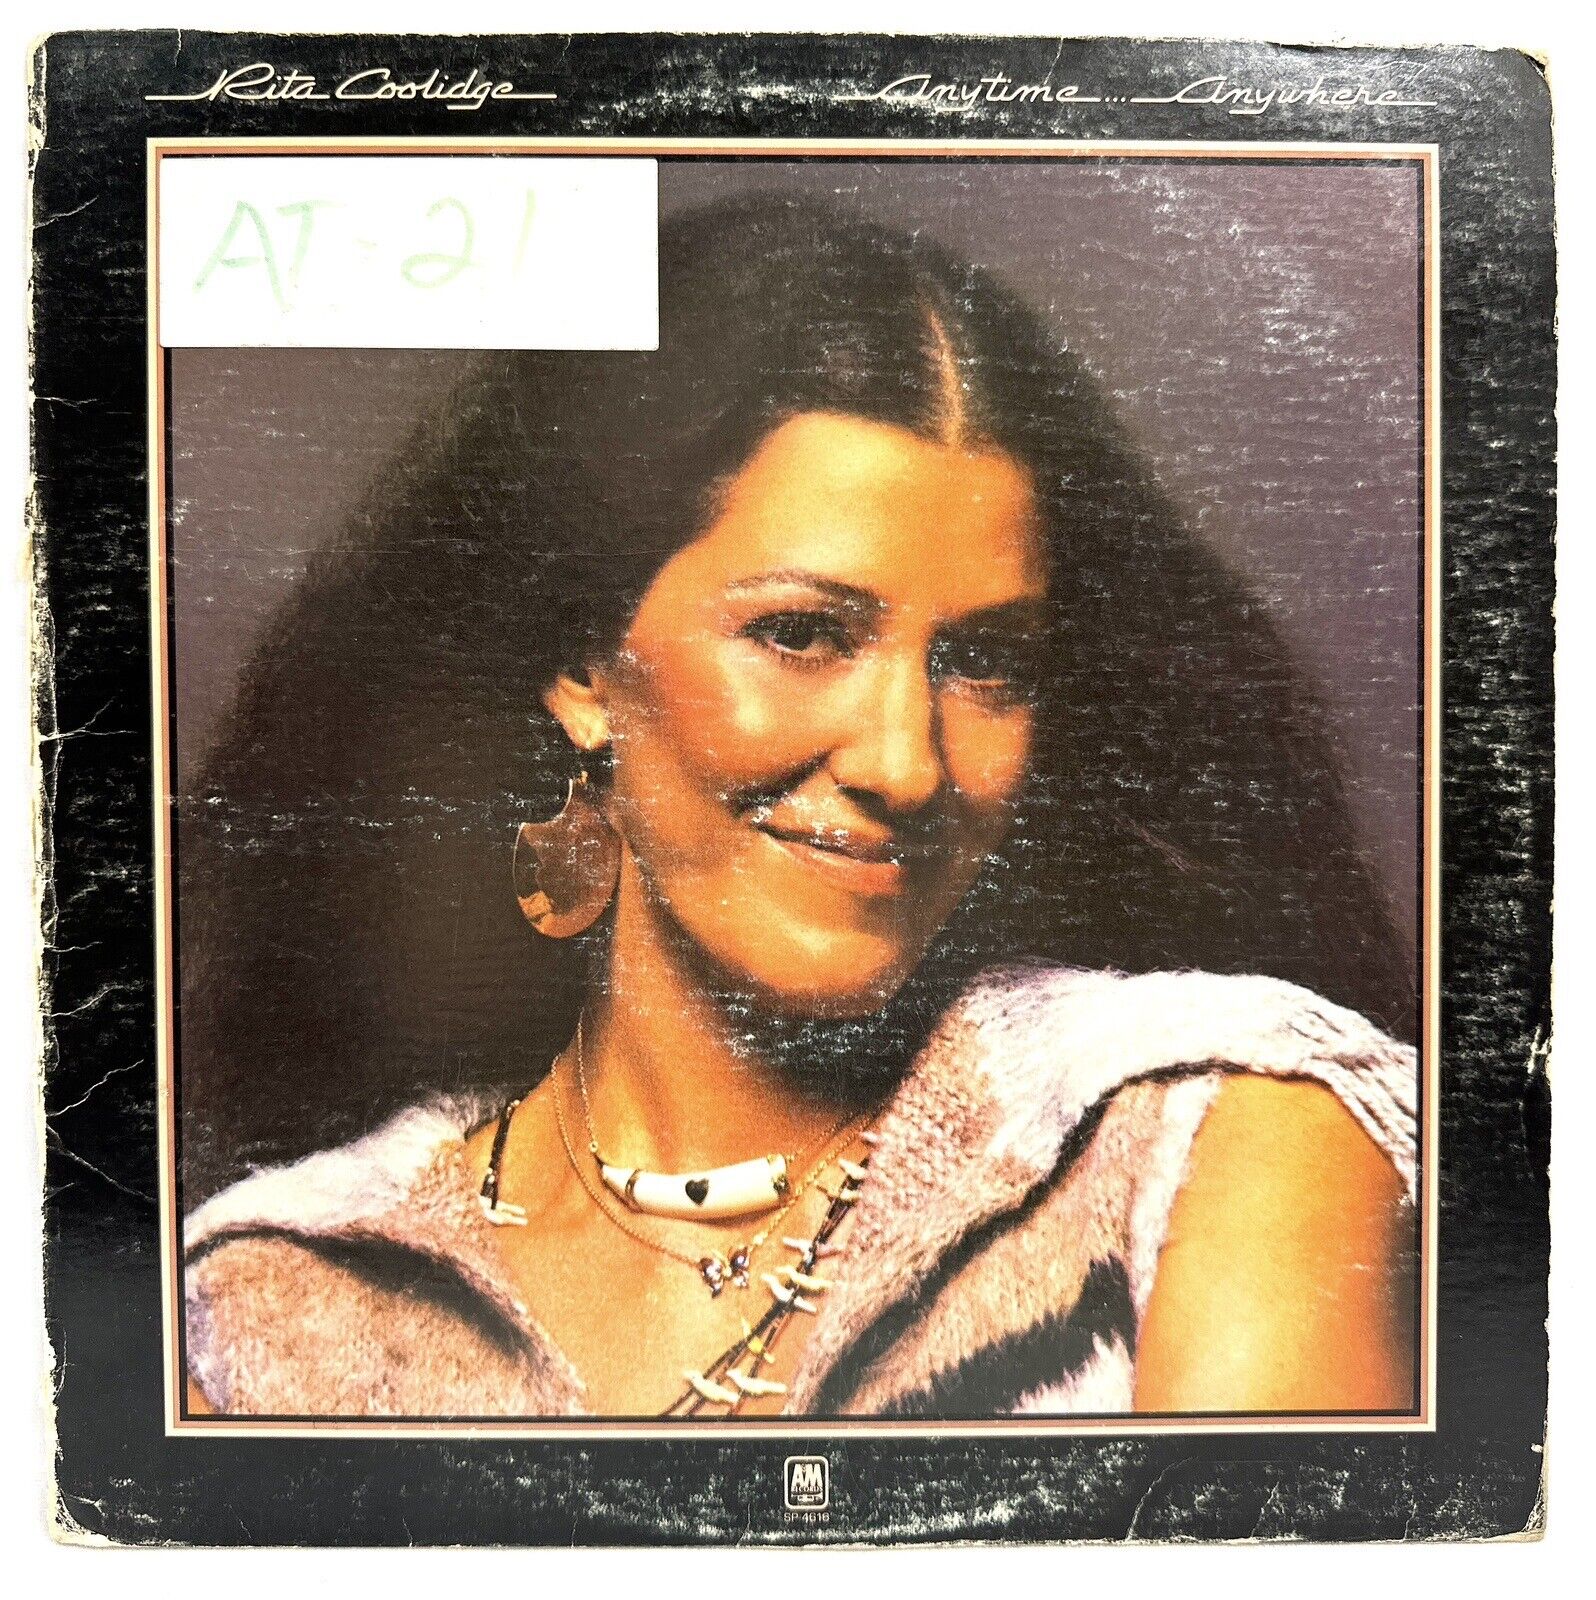 Rita Coolidge - Anytime anywhere - A&M Records - LP Vinyl Record